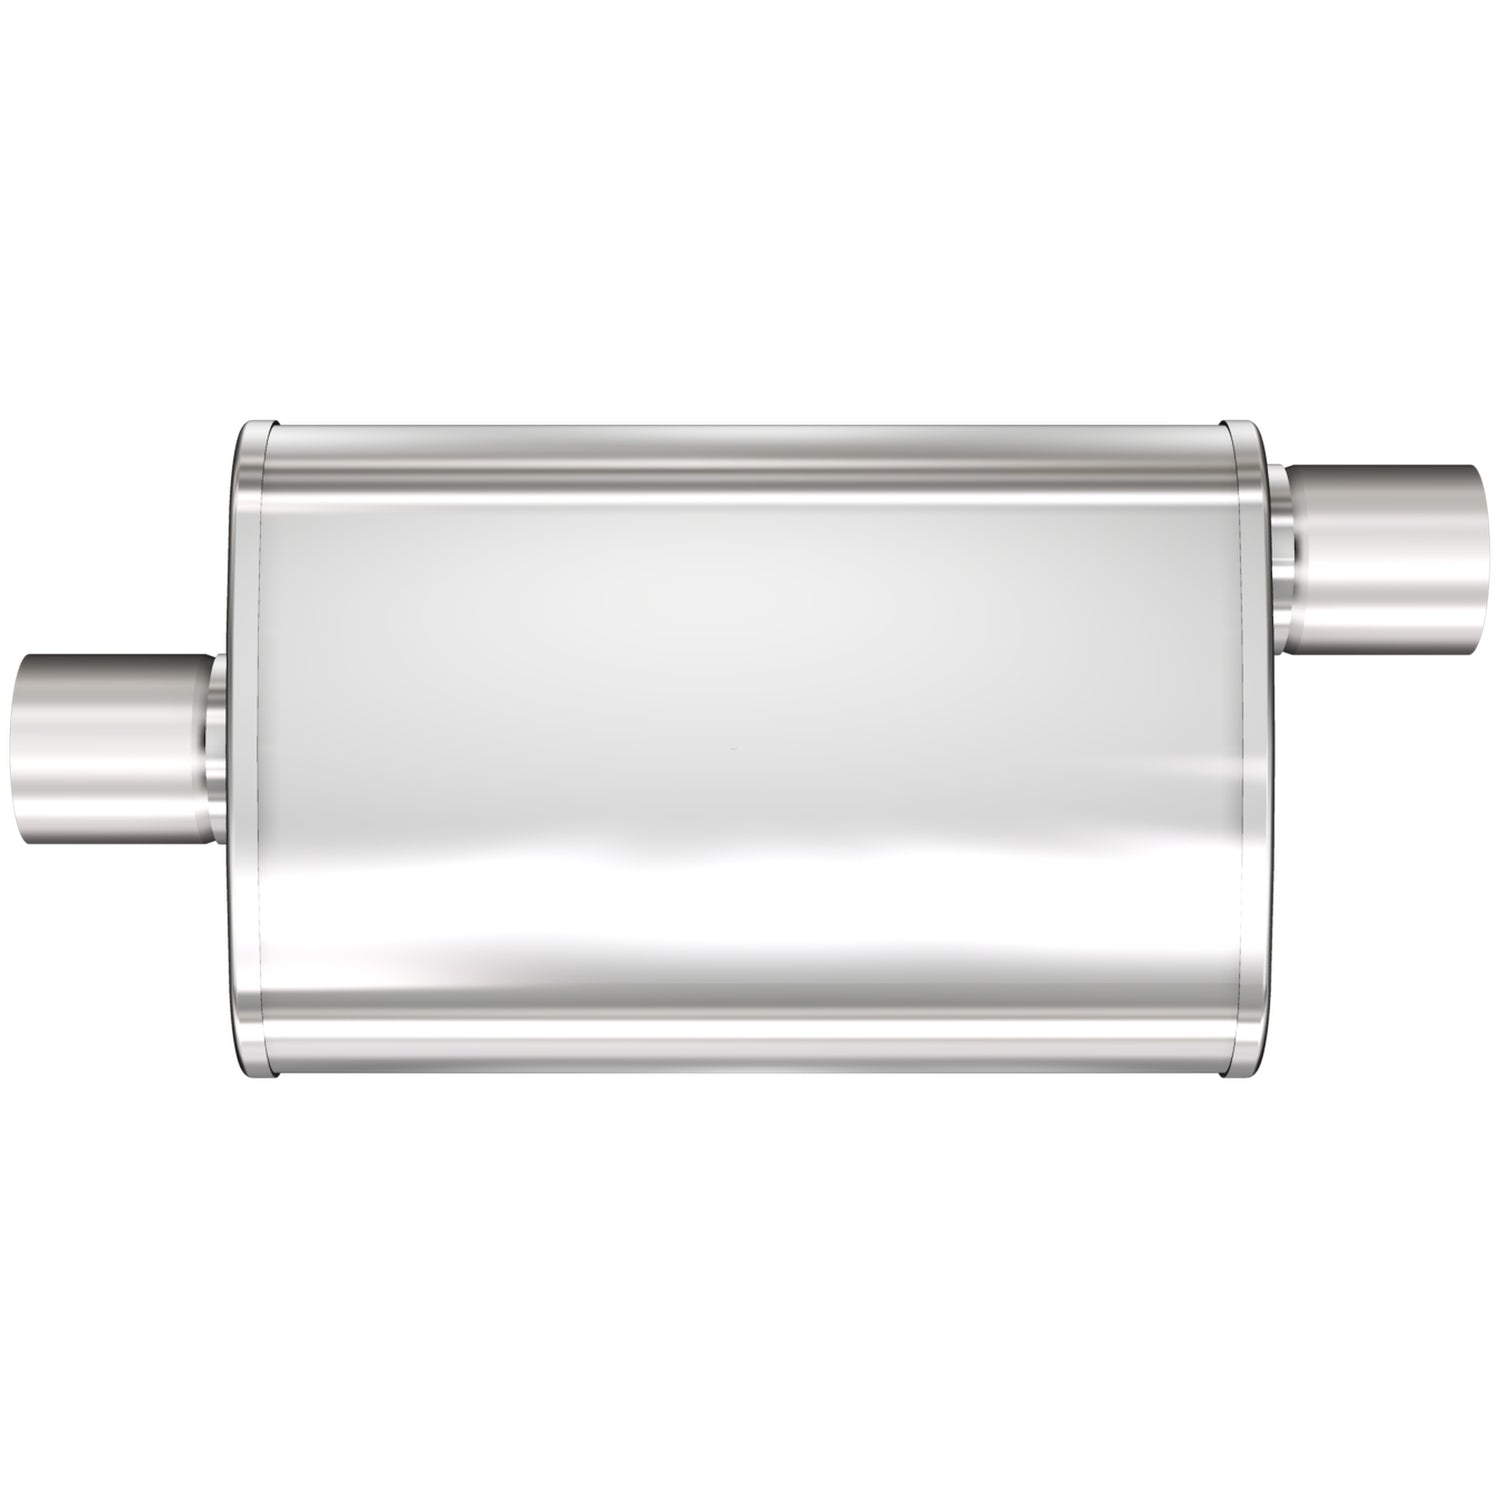 MagnaFlow XL 4 X 9in. Oval Multi-Chamber Performance Exhaust Muffler 13219